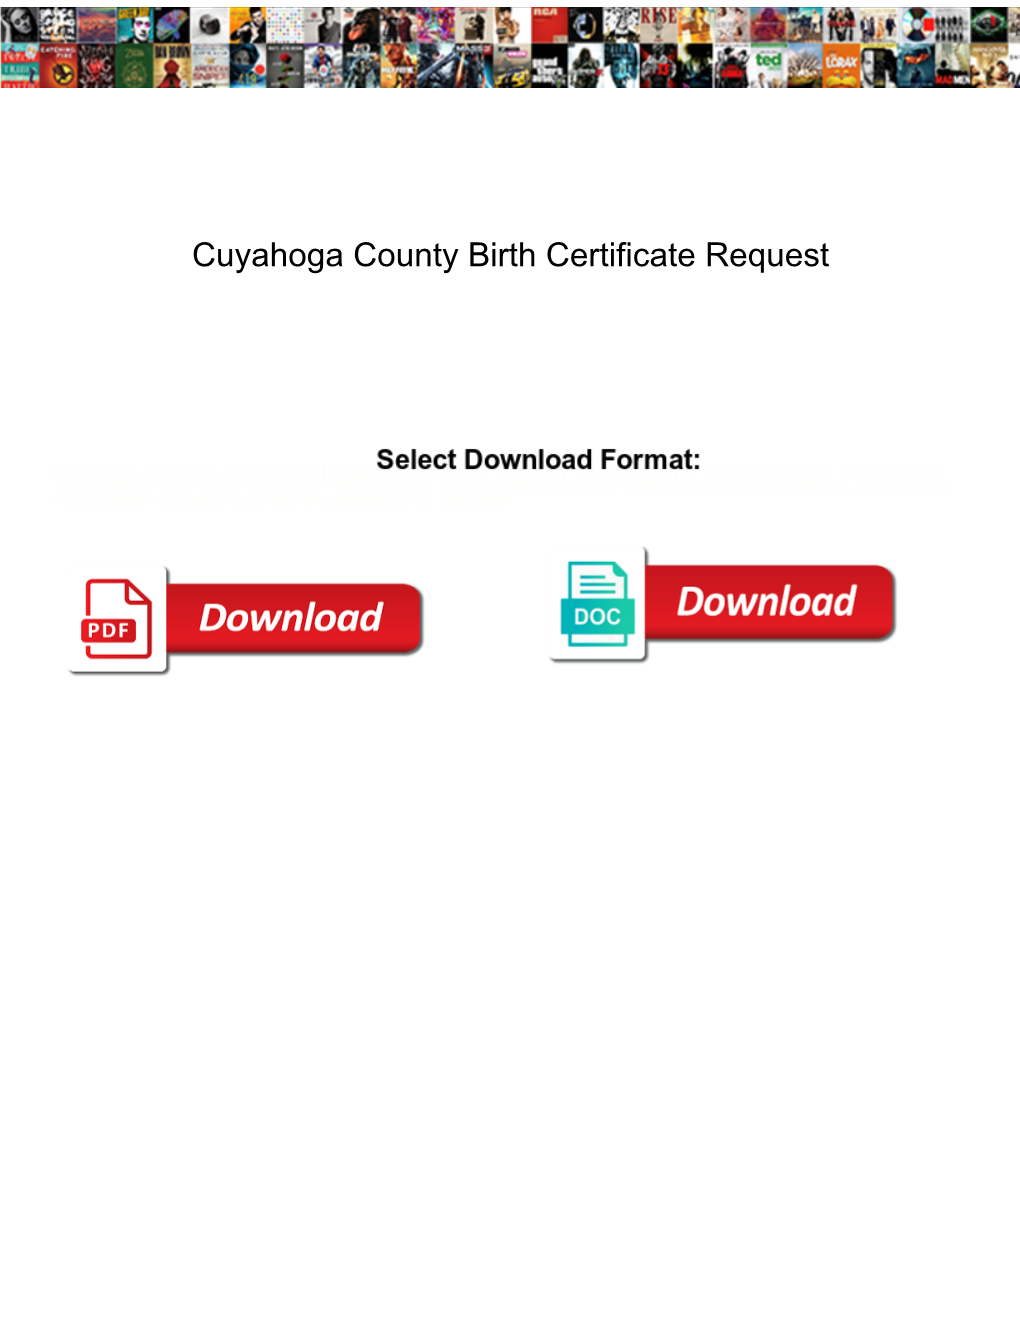 Cuyahoga County Birth Certificate Request